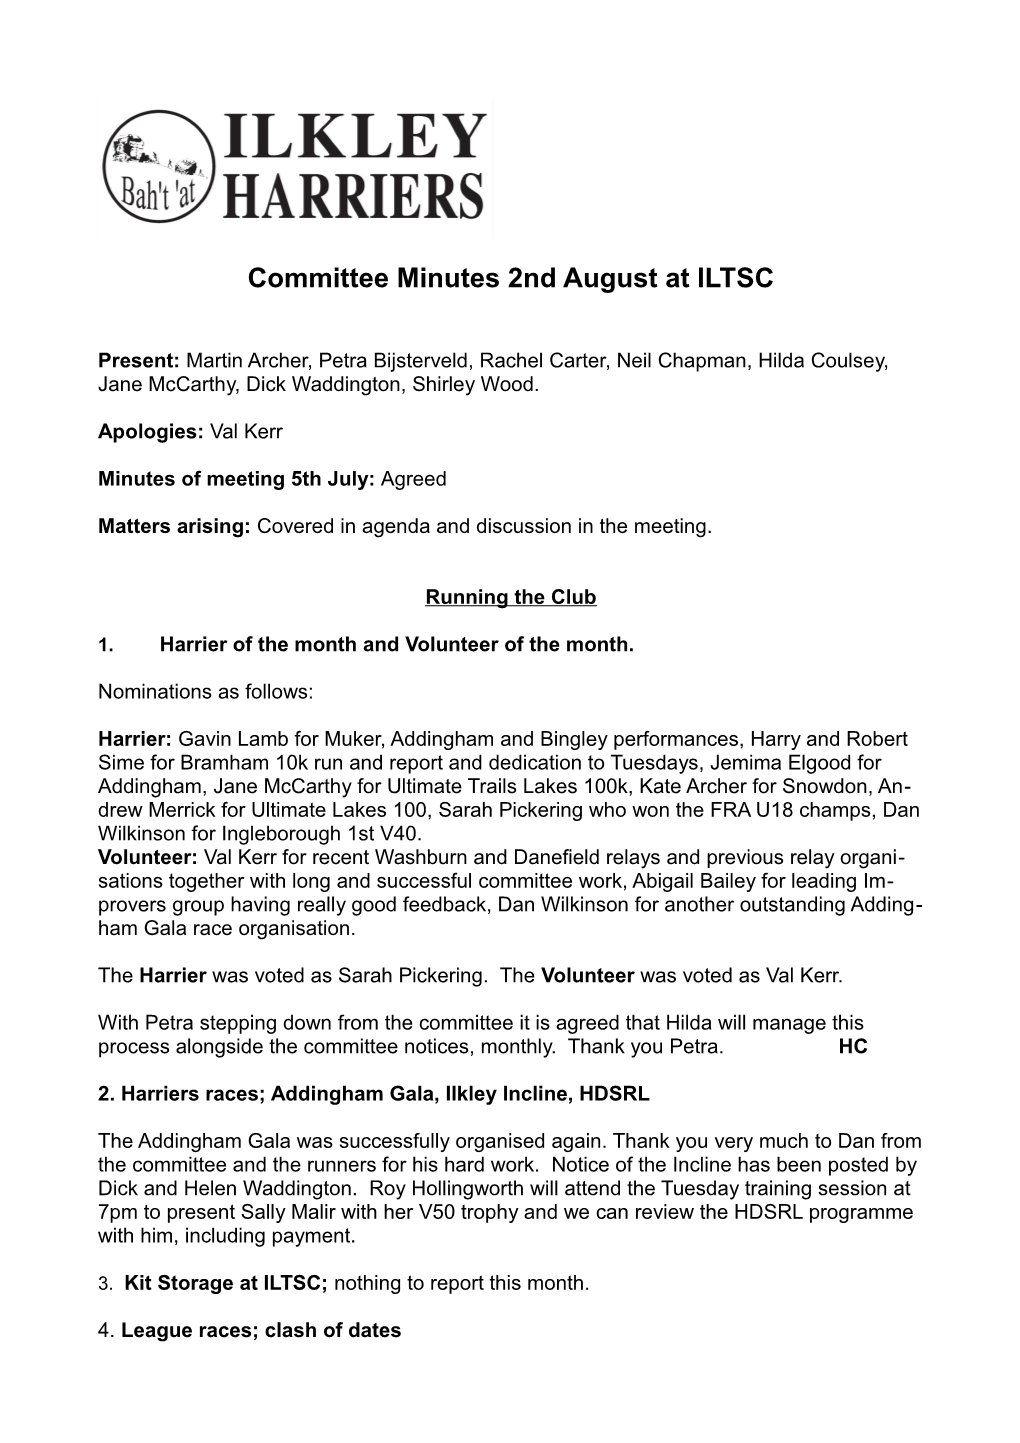 Committee Minutes 2Nd August at ILTSC